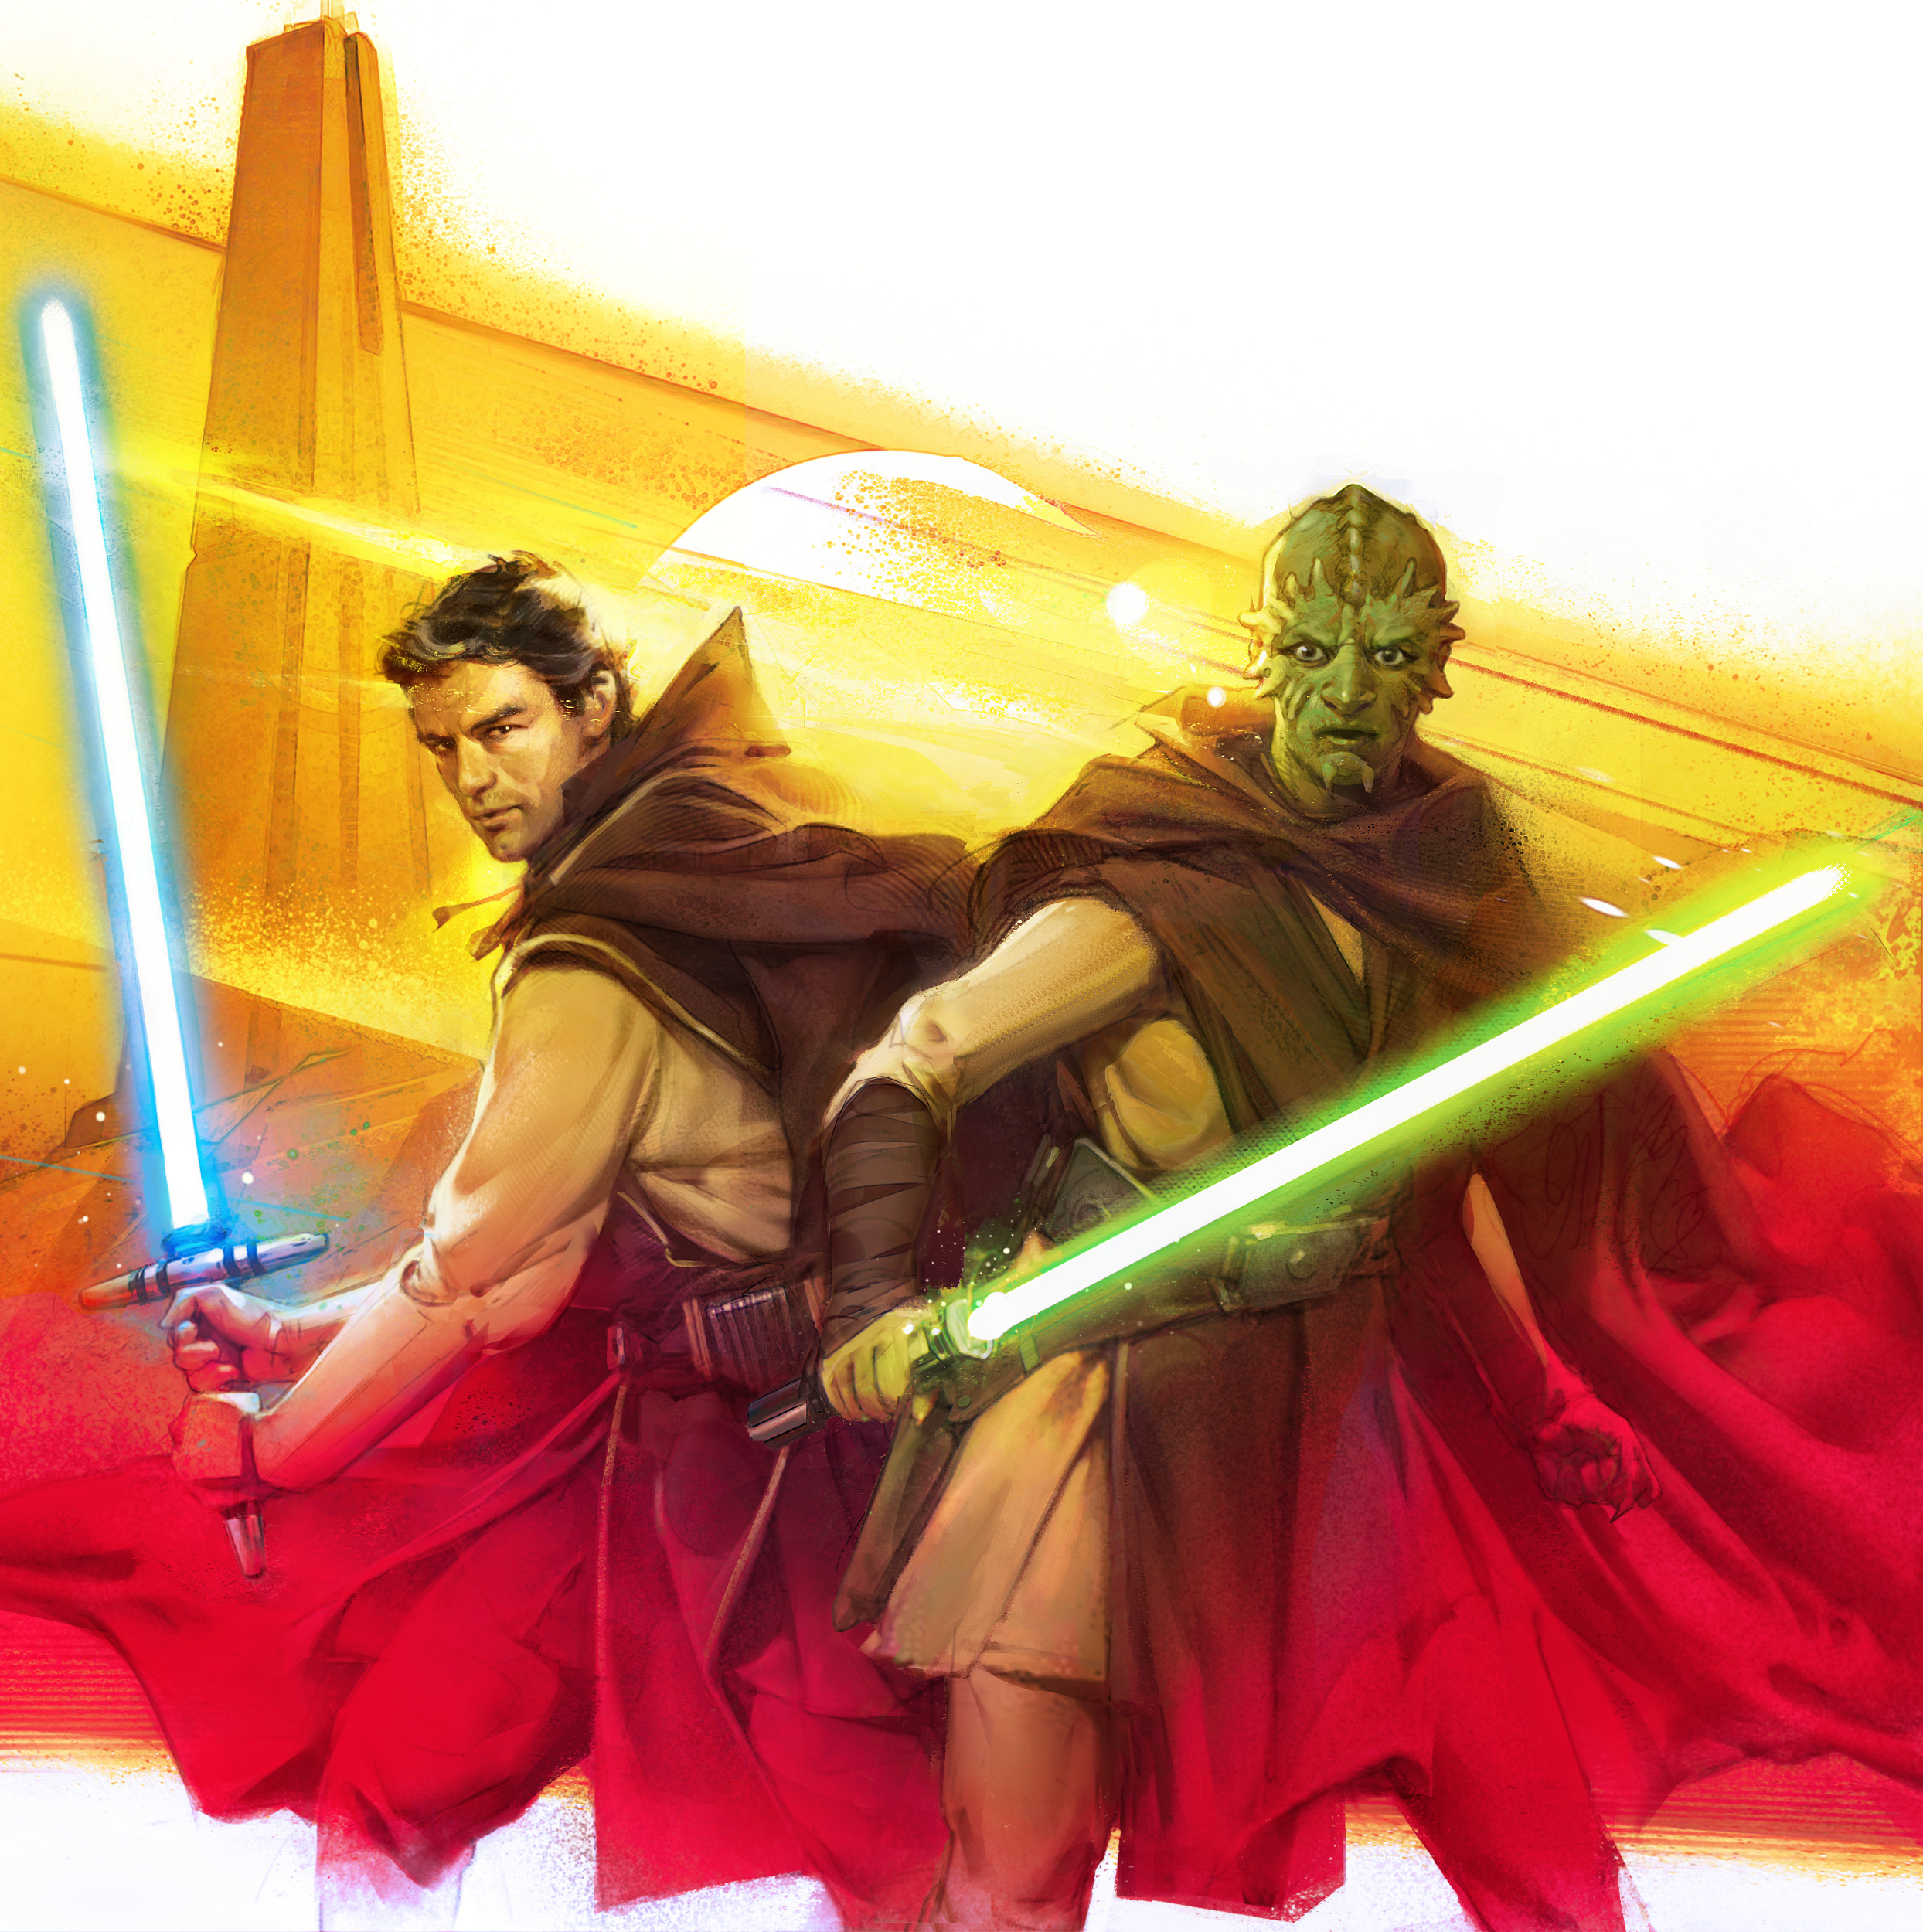 Two Jedi Knights Look to Negotiate a Truce in Star Wars: The High